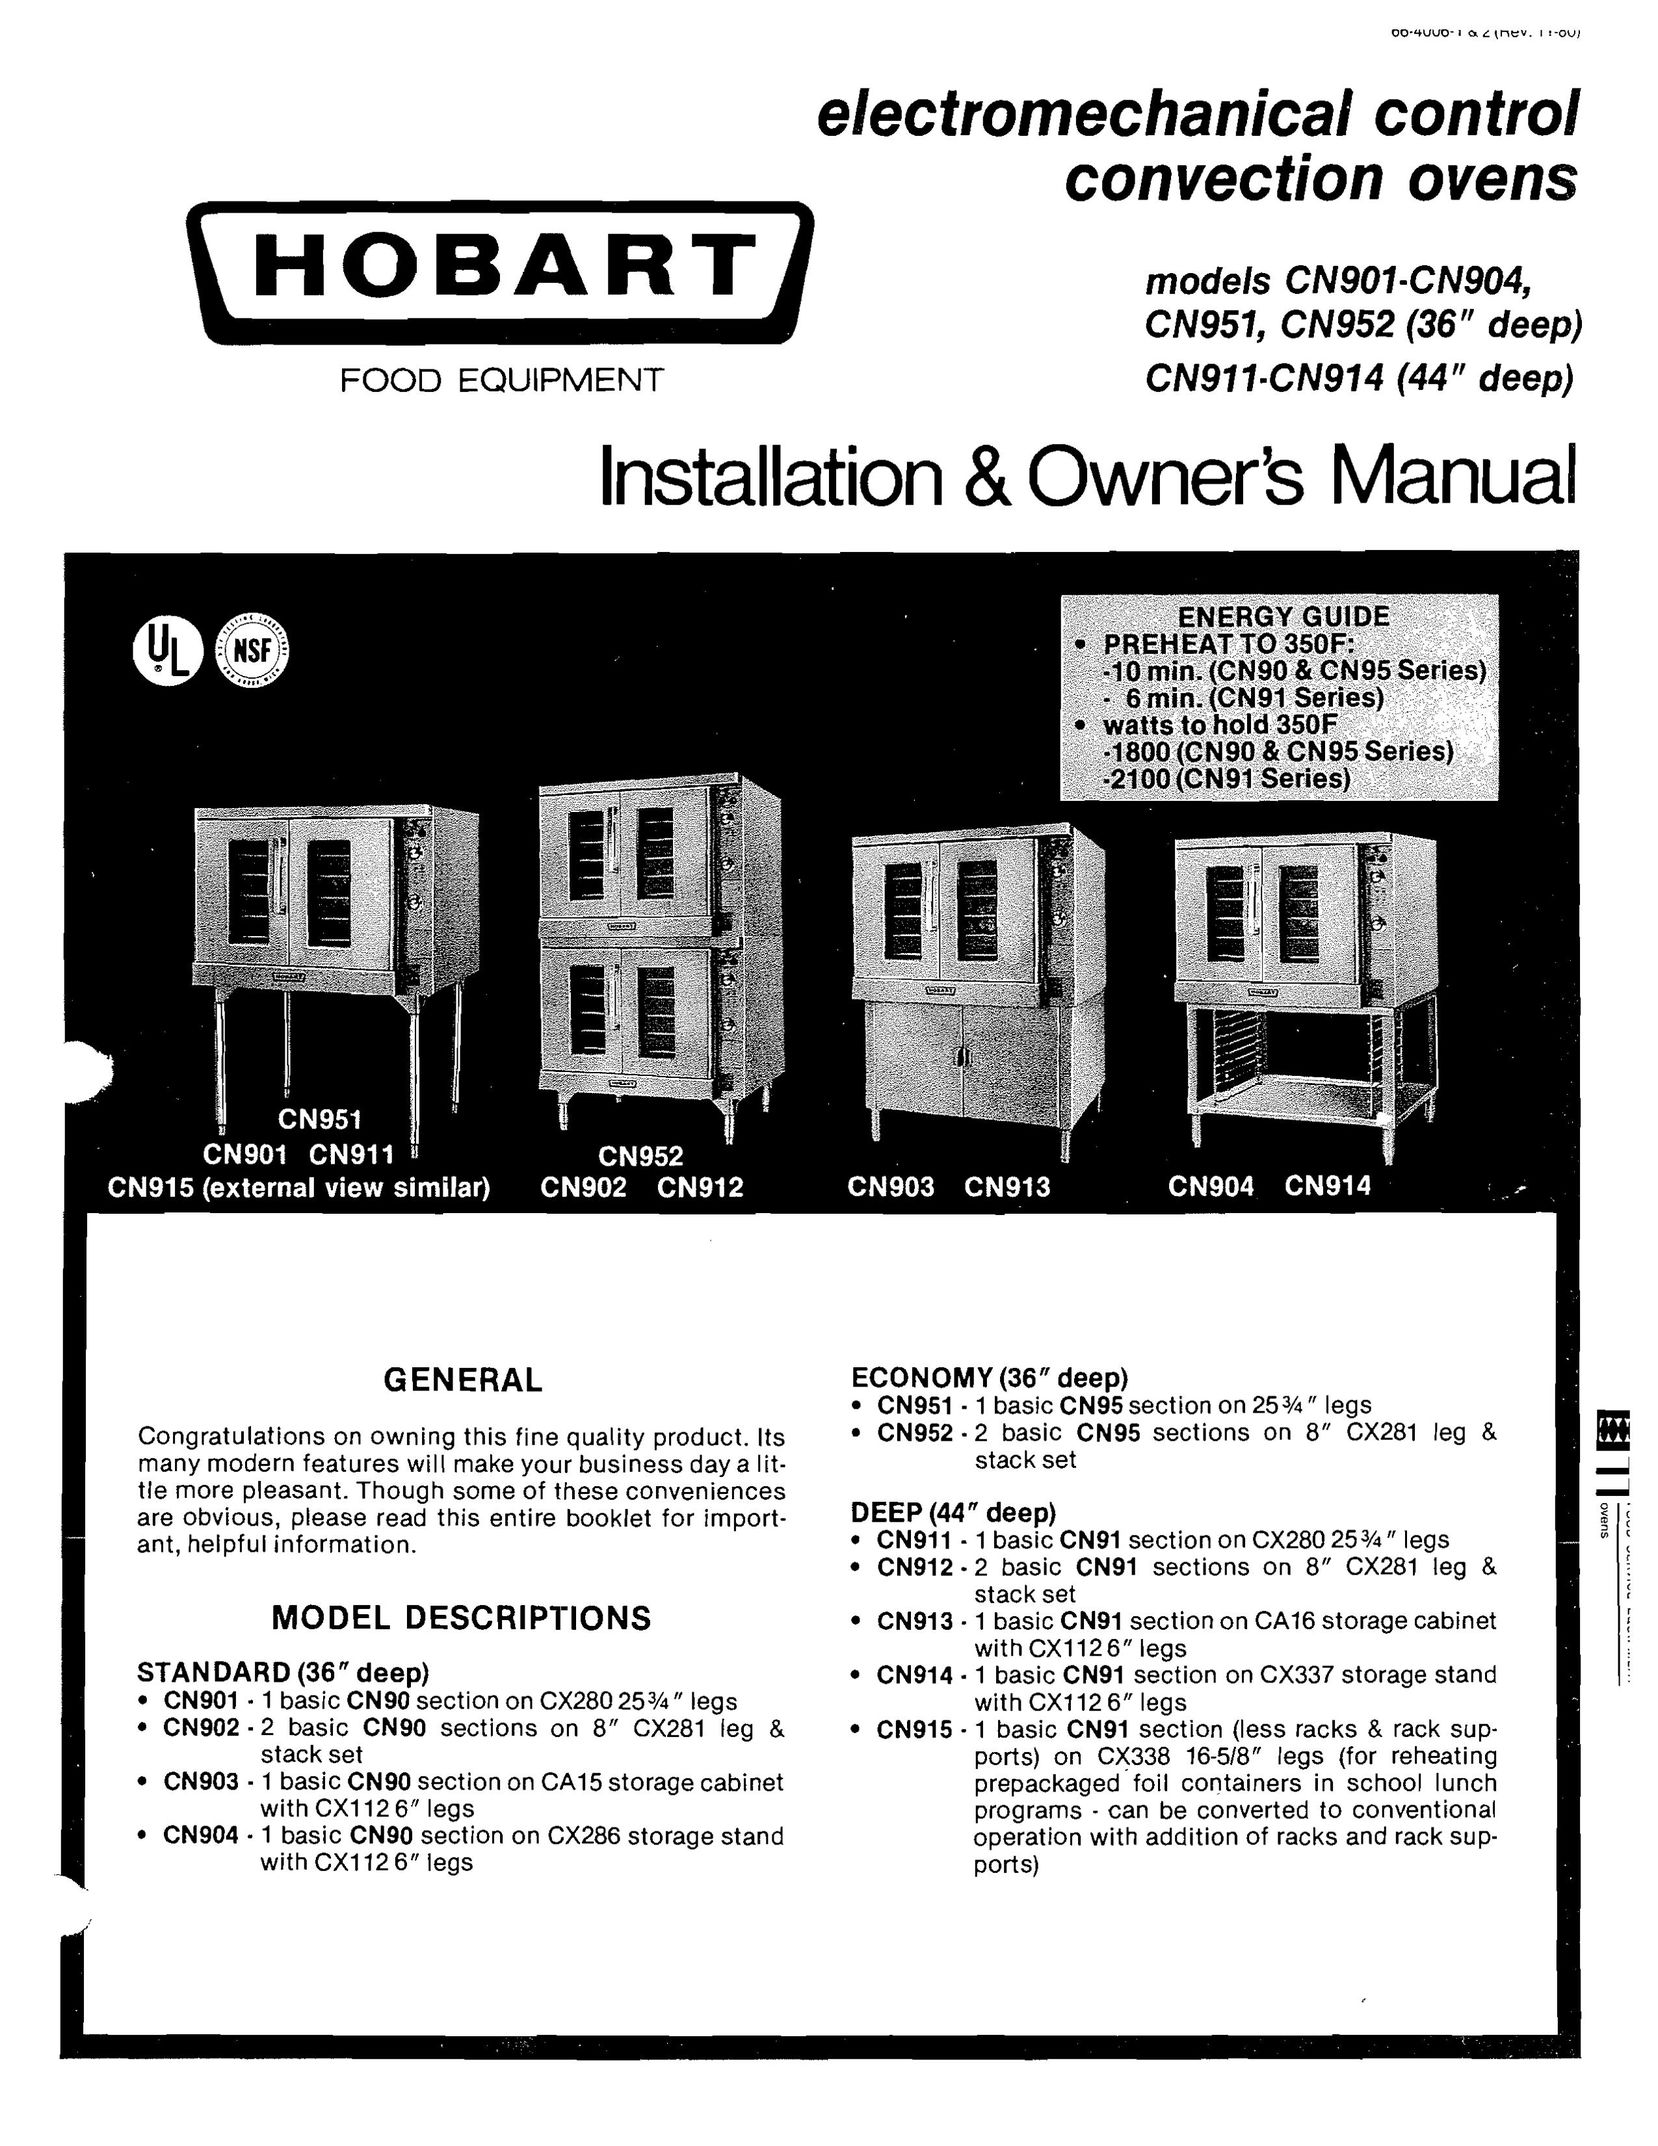 Hobart CN 901-CN904 Convection Oven User Manual